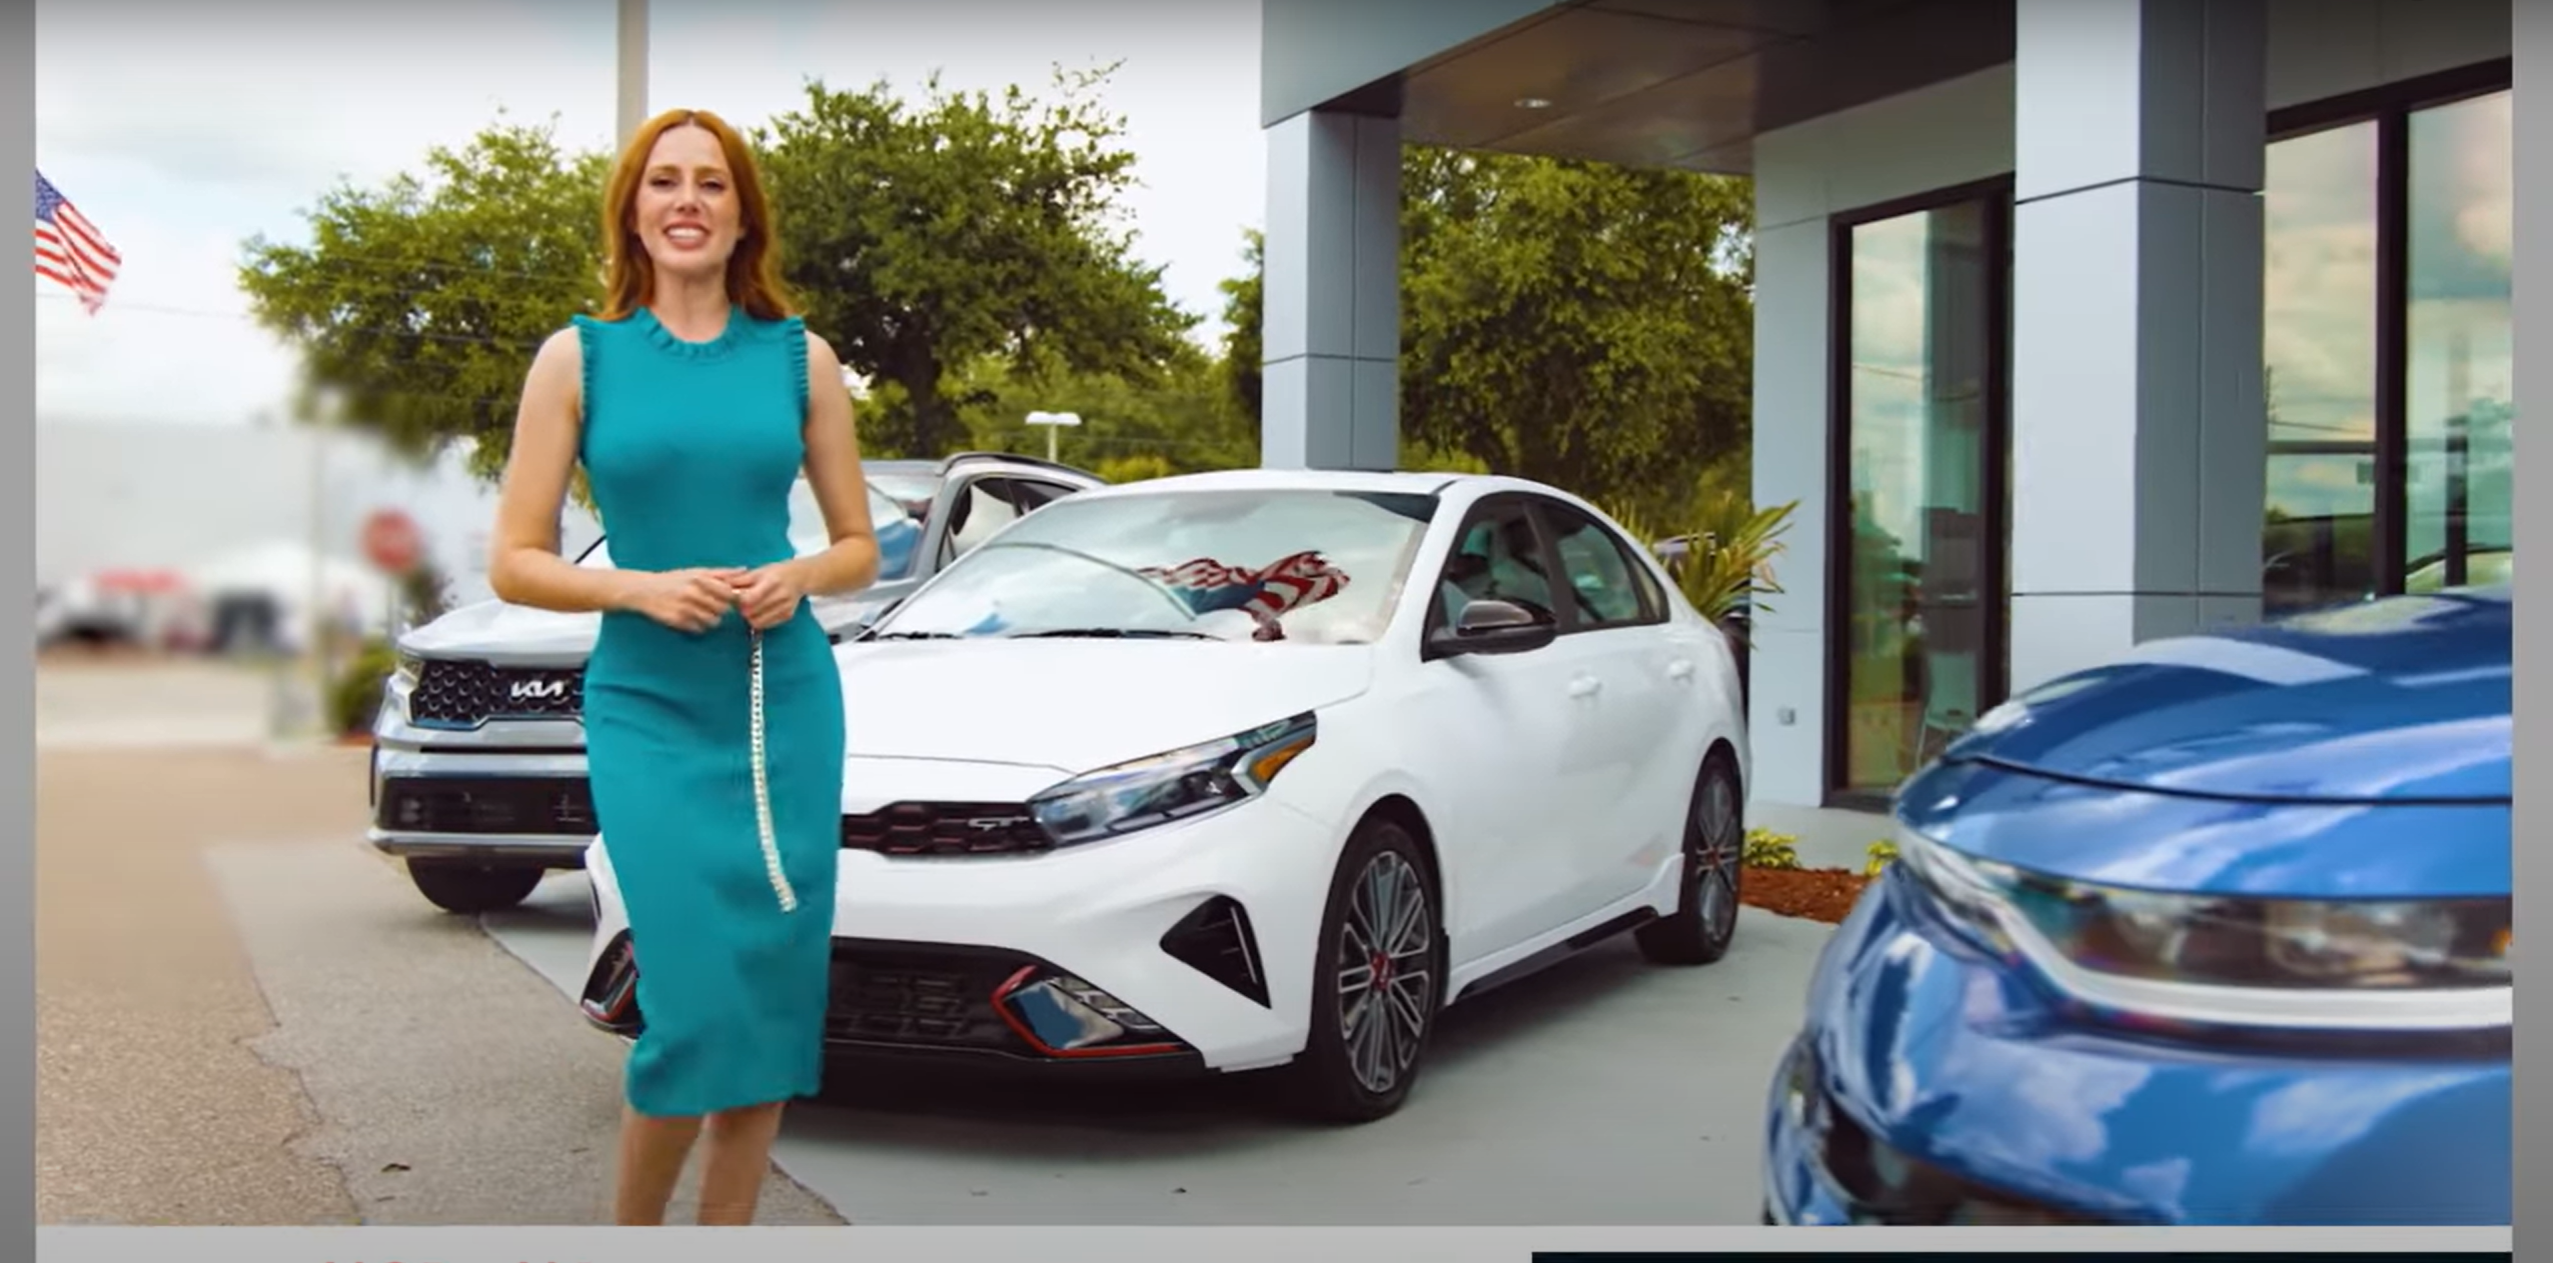 Why Choose Wesley Chapel Kia for Your Next Vehicle Purchase?